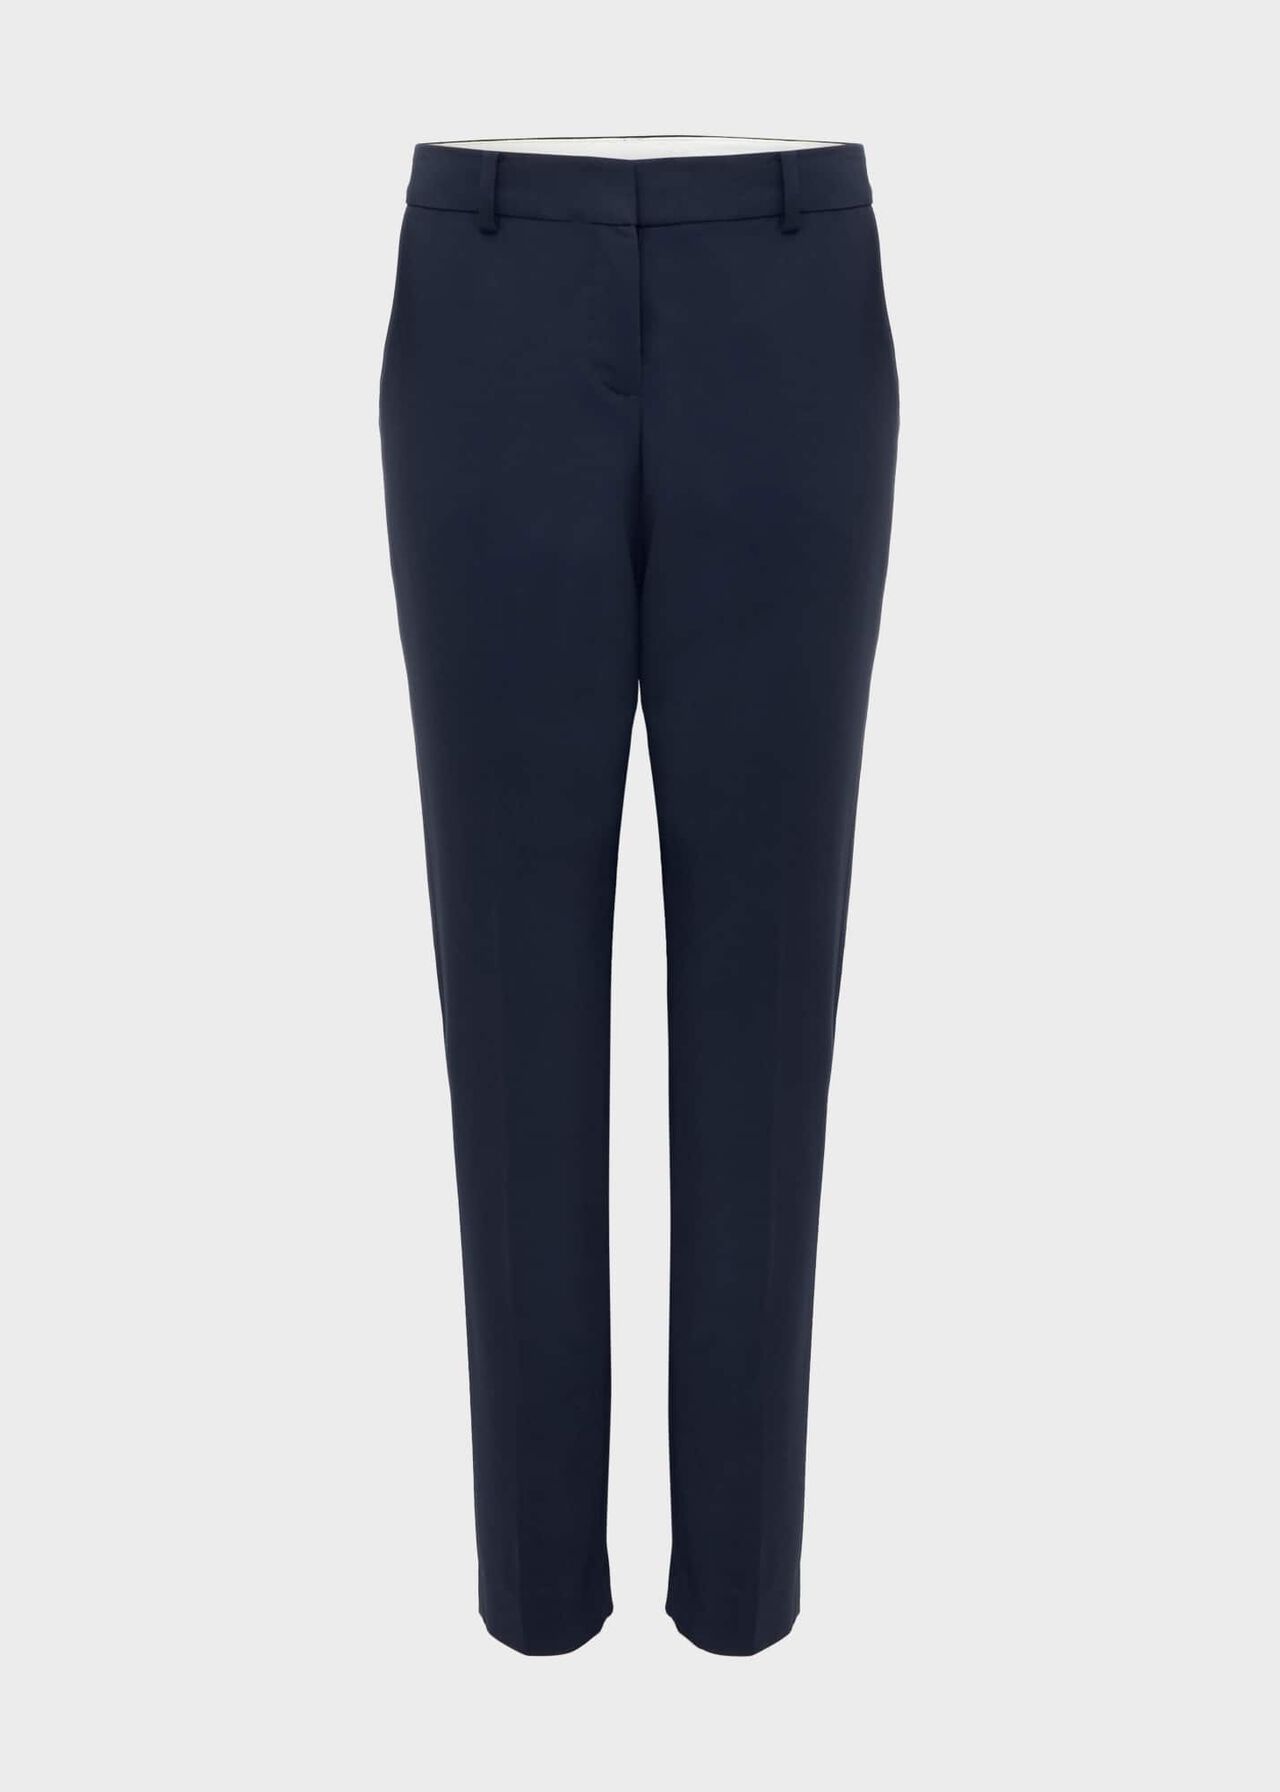 Petite Quin Tapered Trousers, Navy, hi-res